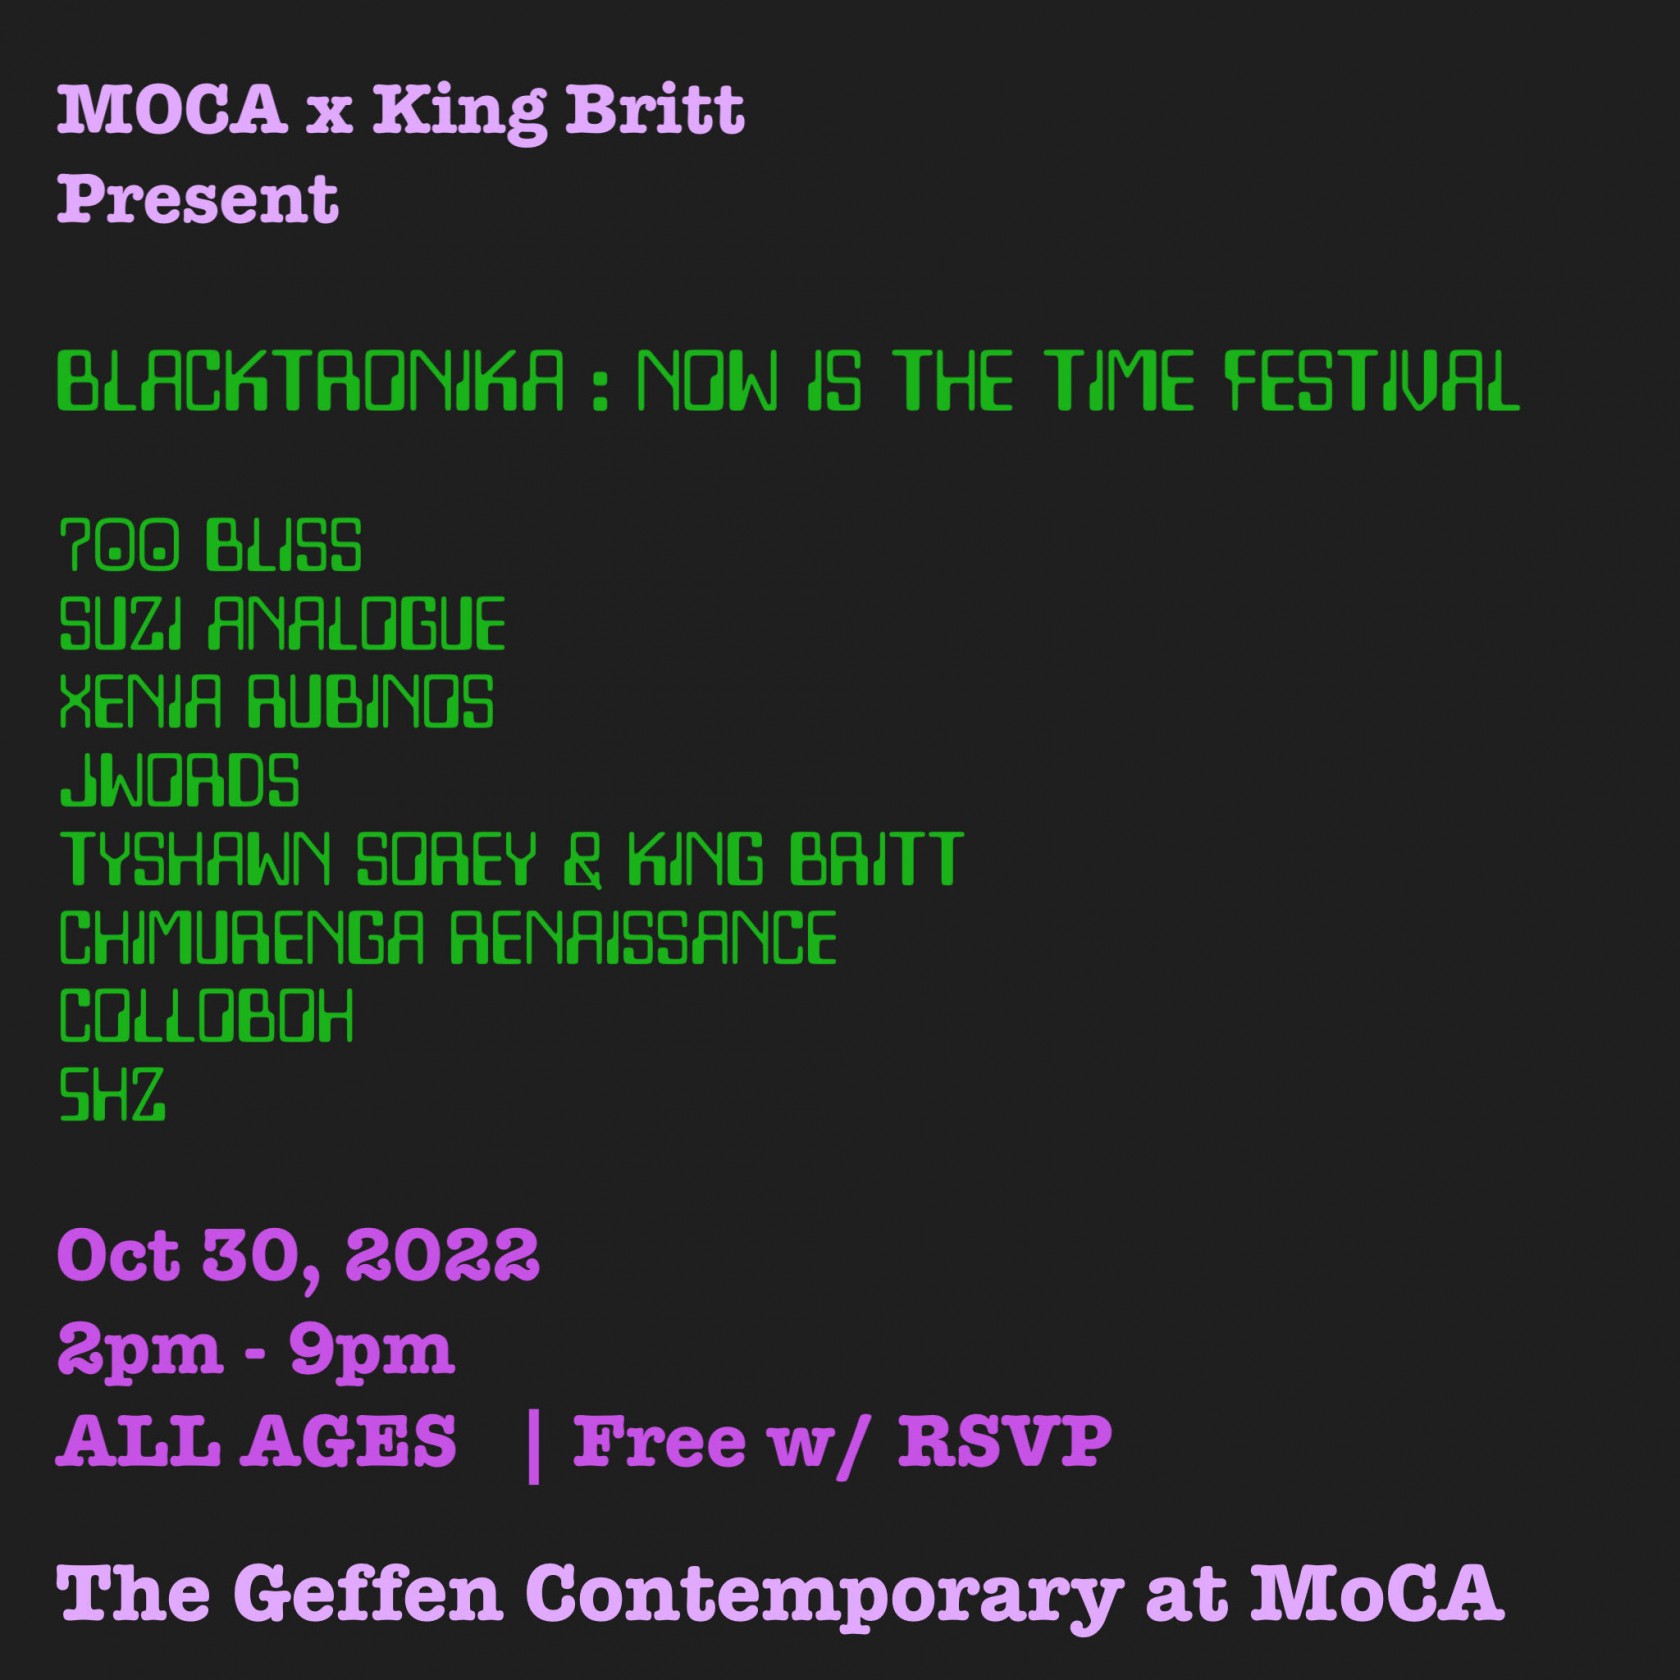 Blacktronika: Now Is The Time Festival Organized with King Britt